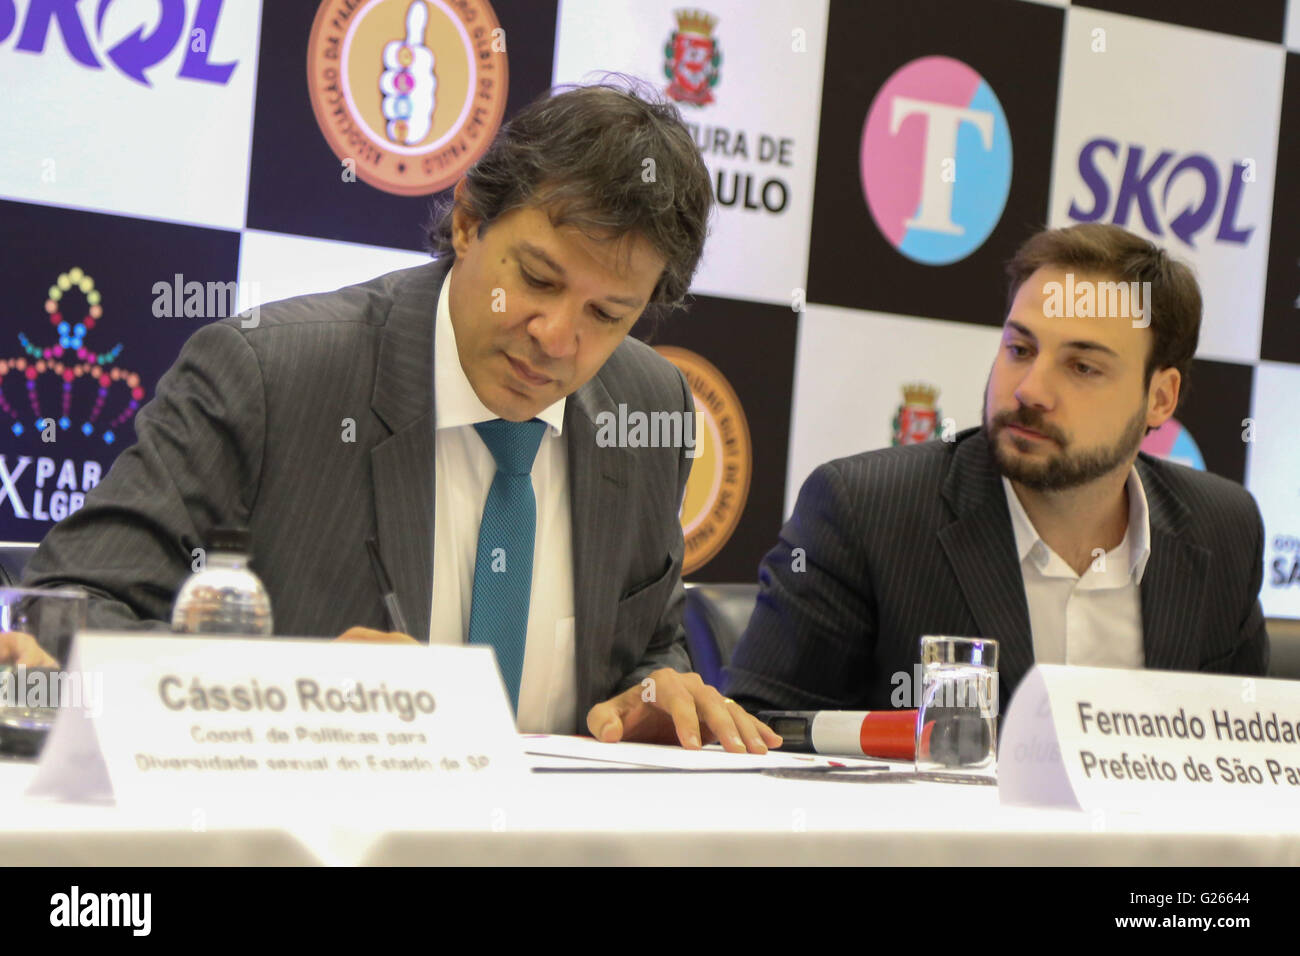 SAO PAULO, Brazil - 05/24/2016: PRESS CONFERENCE OF 20 ? PARADE LGBT PRIDE - happened on the morning of Tuesday (24) Media Collective the 20th LGBT Pride Parade in Sao Paulo with the presence of Mayor Fernando Haddad at the Renaissance Hotel located at Alameda Santos, 2233 - Jardim Paulista. Pictured Mayor Fernando Haddad signed the decree that includes LGBT Pride Parade in the official calendar of events of S?o Paulo. (Photo: Jales Valquer / FotoArena) Stock Photo